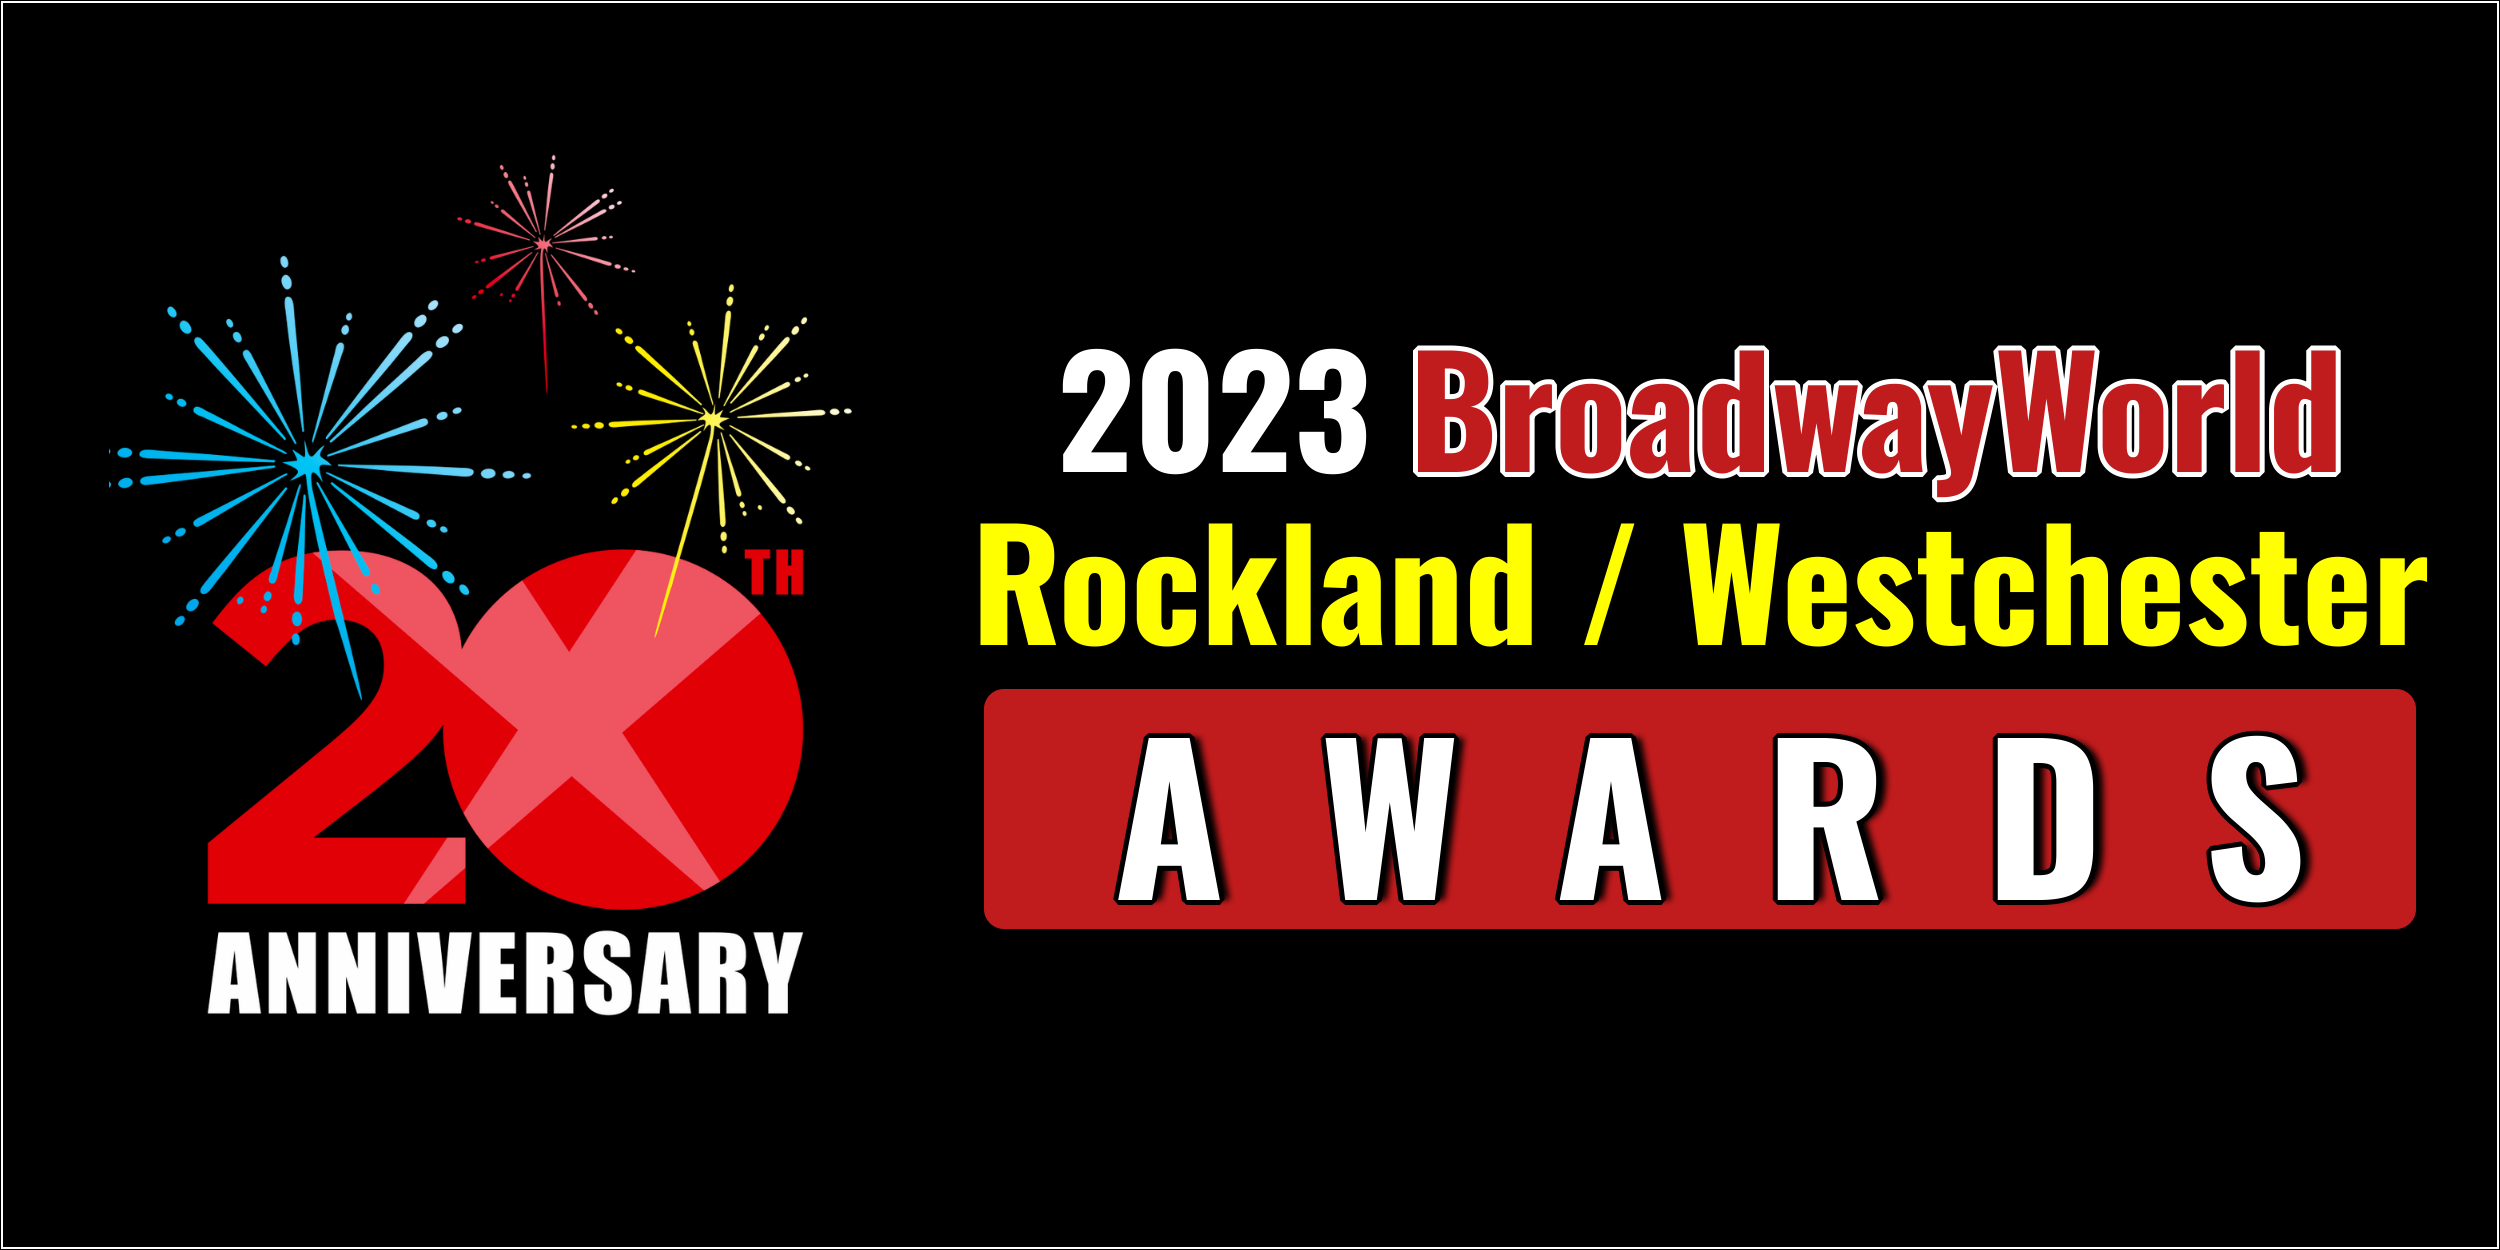 Latest Standings Announced For The 2023 BroadwayWorld Rockland / Westchester Awards; RED L Photo